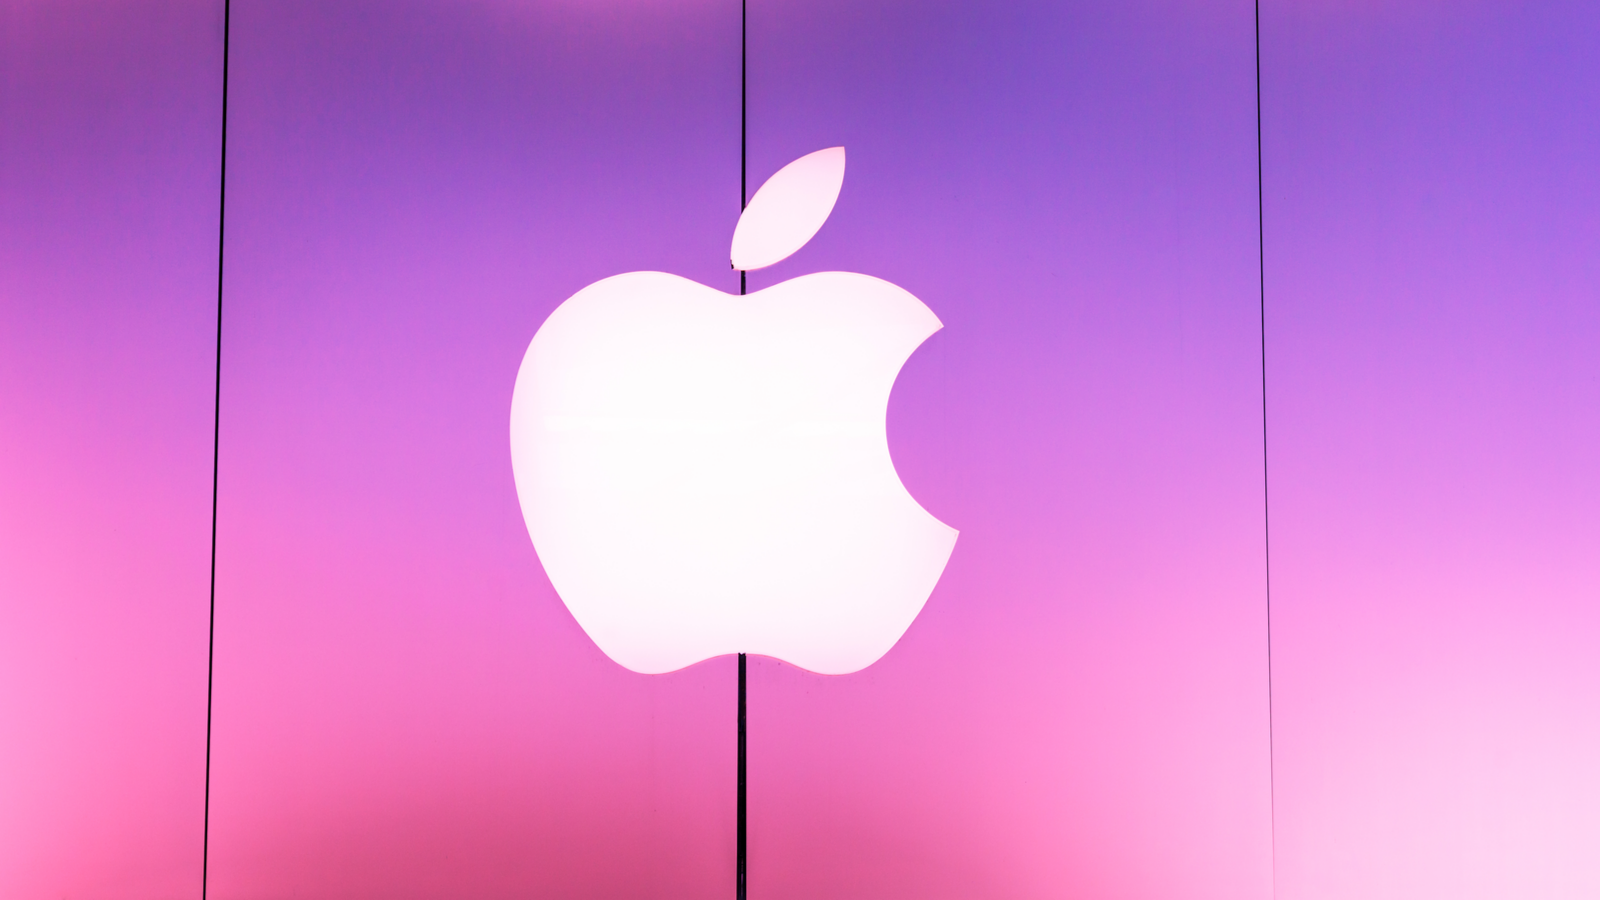 Apple logo on a pink and purple background. AAPL stock.